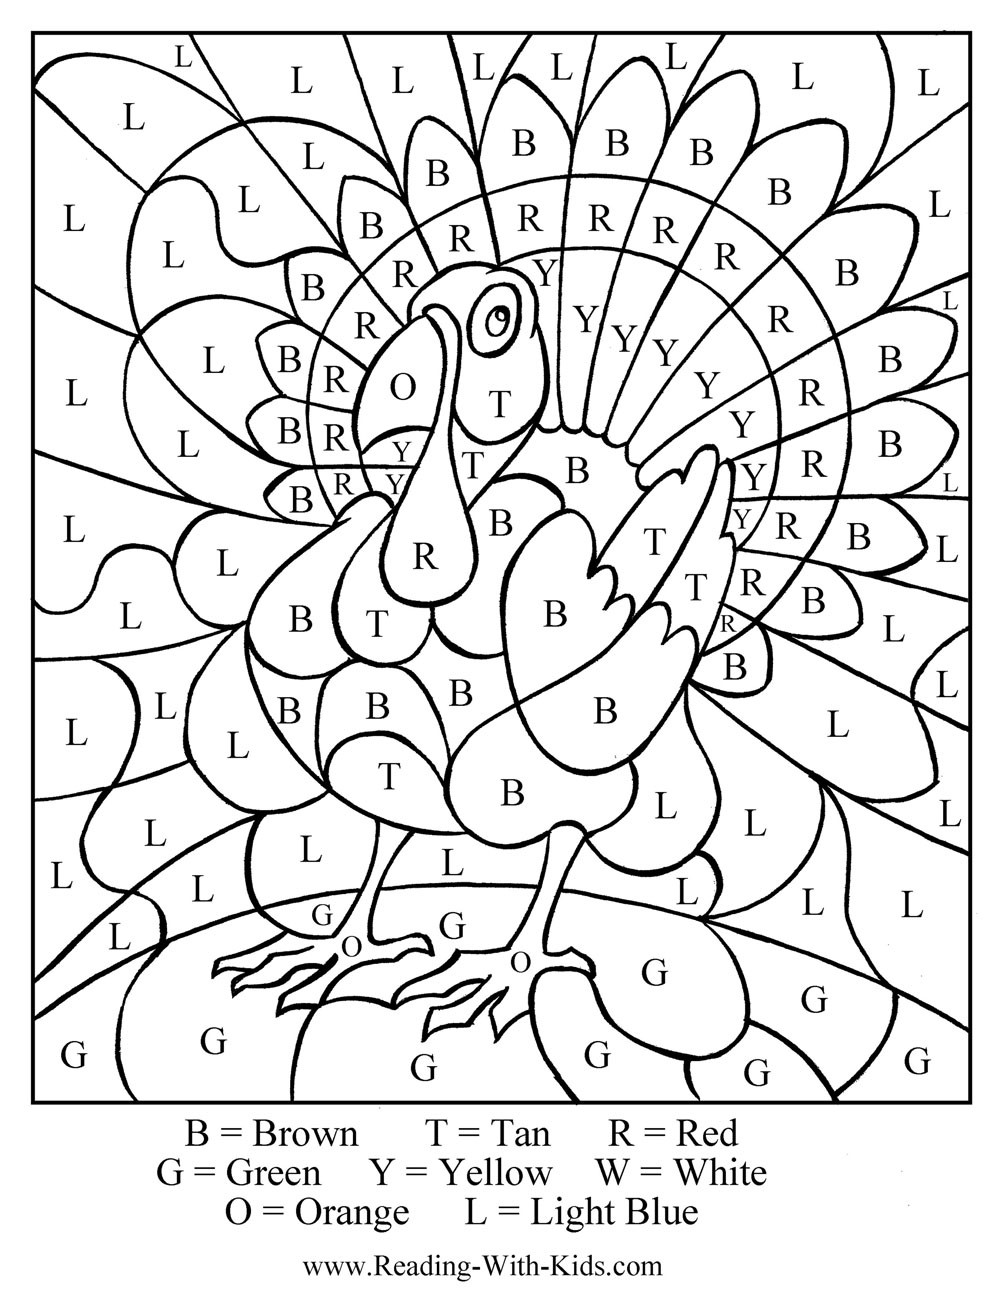 Coloring Pages For Kids Thanksgiving
 Free Thanksgiving Coloring Pages & Games Printables